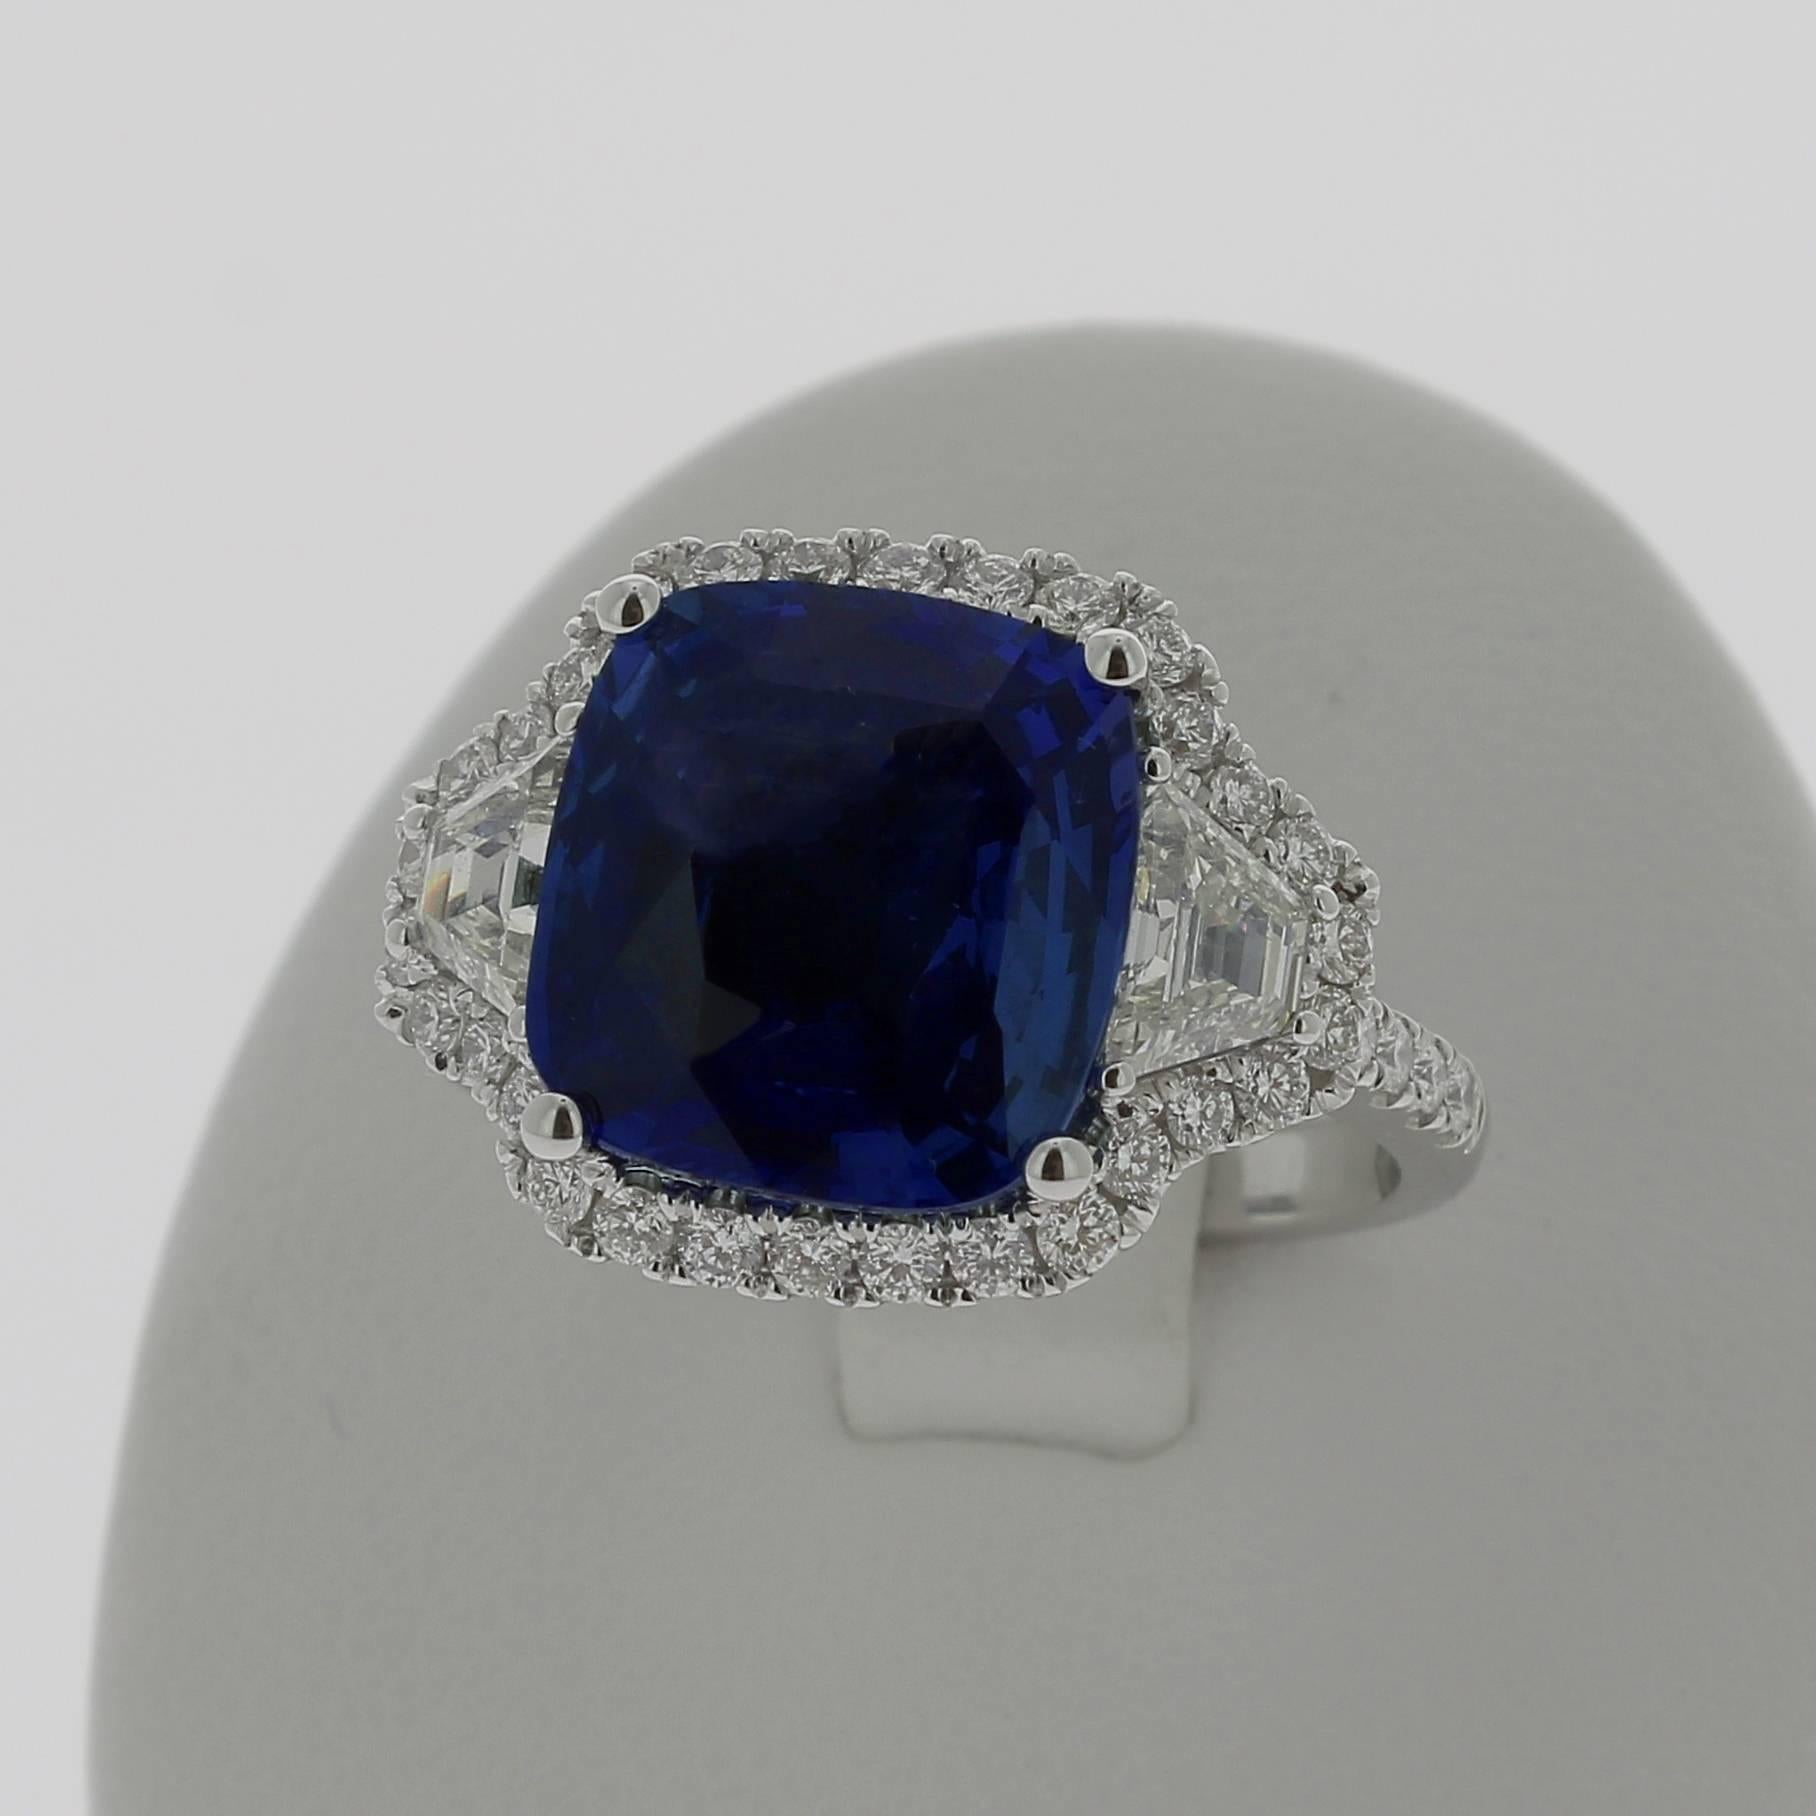 A Blue Sapphire Ring weighing 7.07 carats. 
The stone’s shape is cushion, with a striking Blue.
The ring is set with two trodia Diamond weighing 0.72 Carats and 40 Rounds Diamonds weighing 0.60 Carats.
The Sapphire is accompanied by a certificate